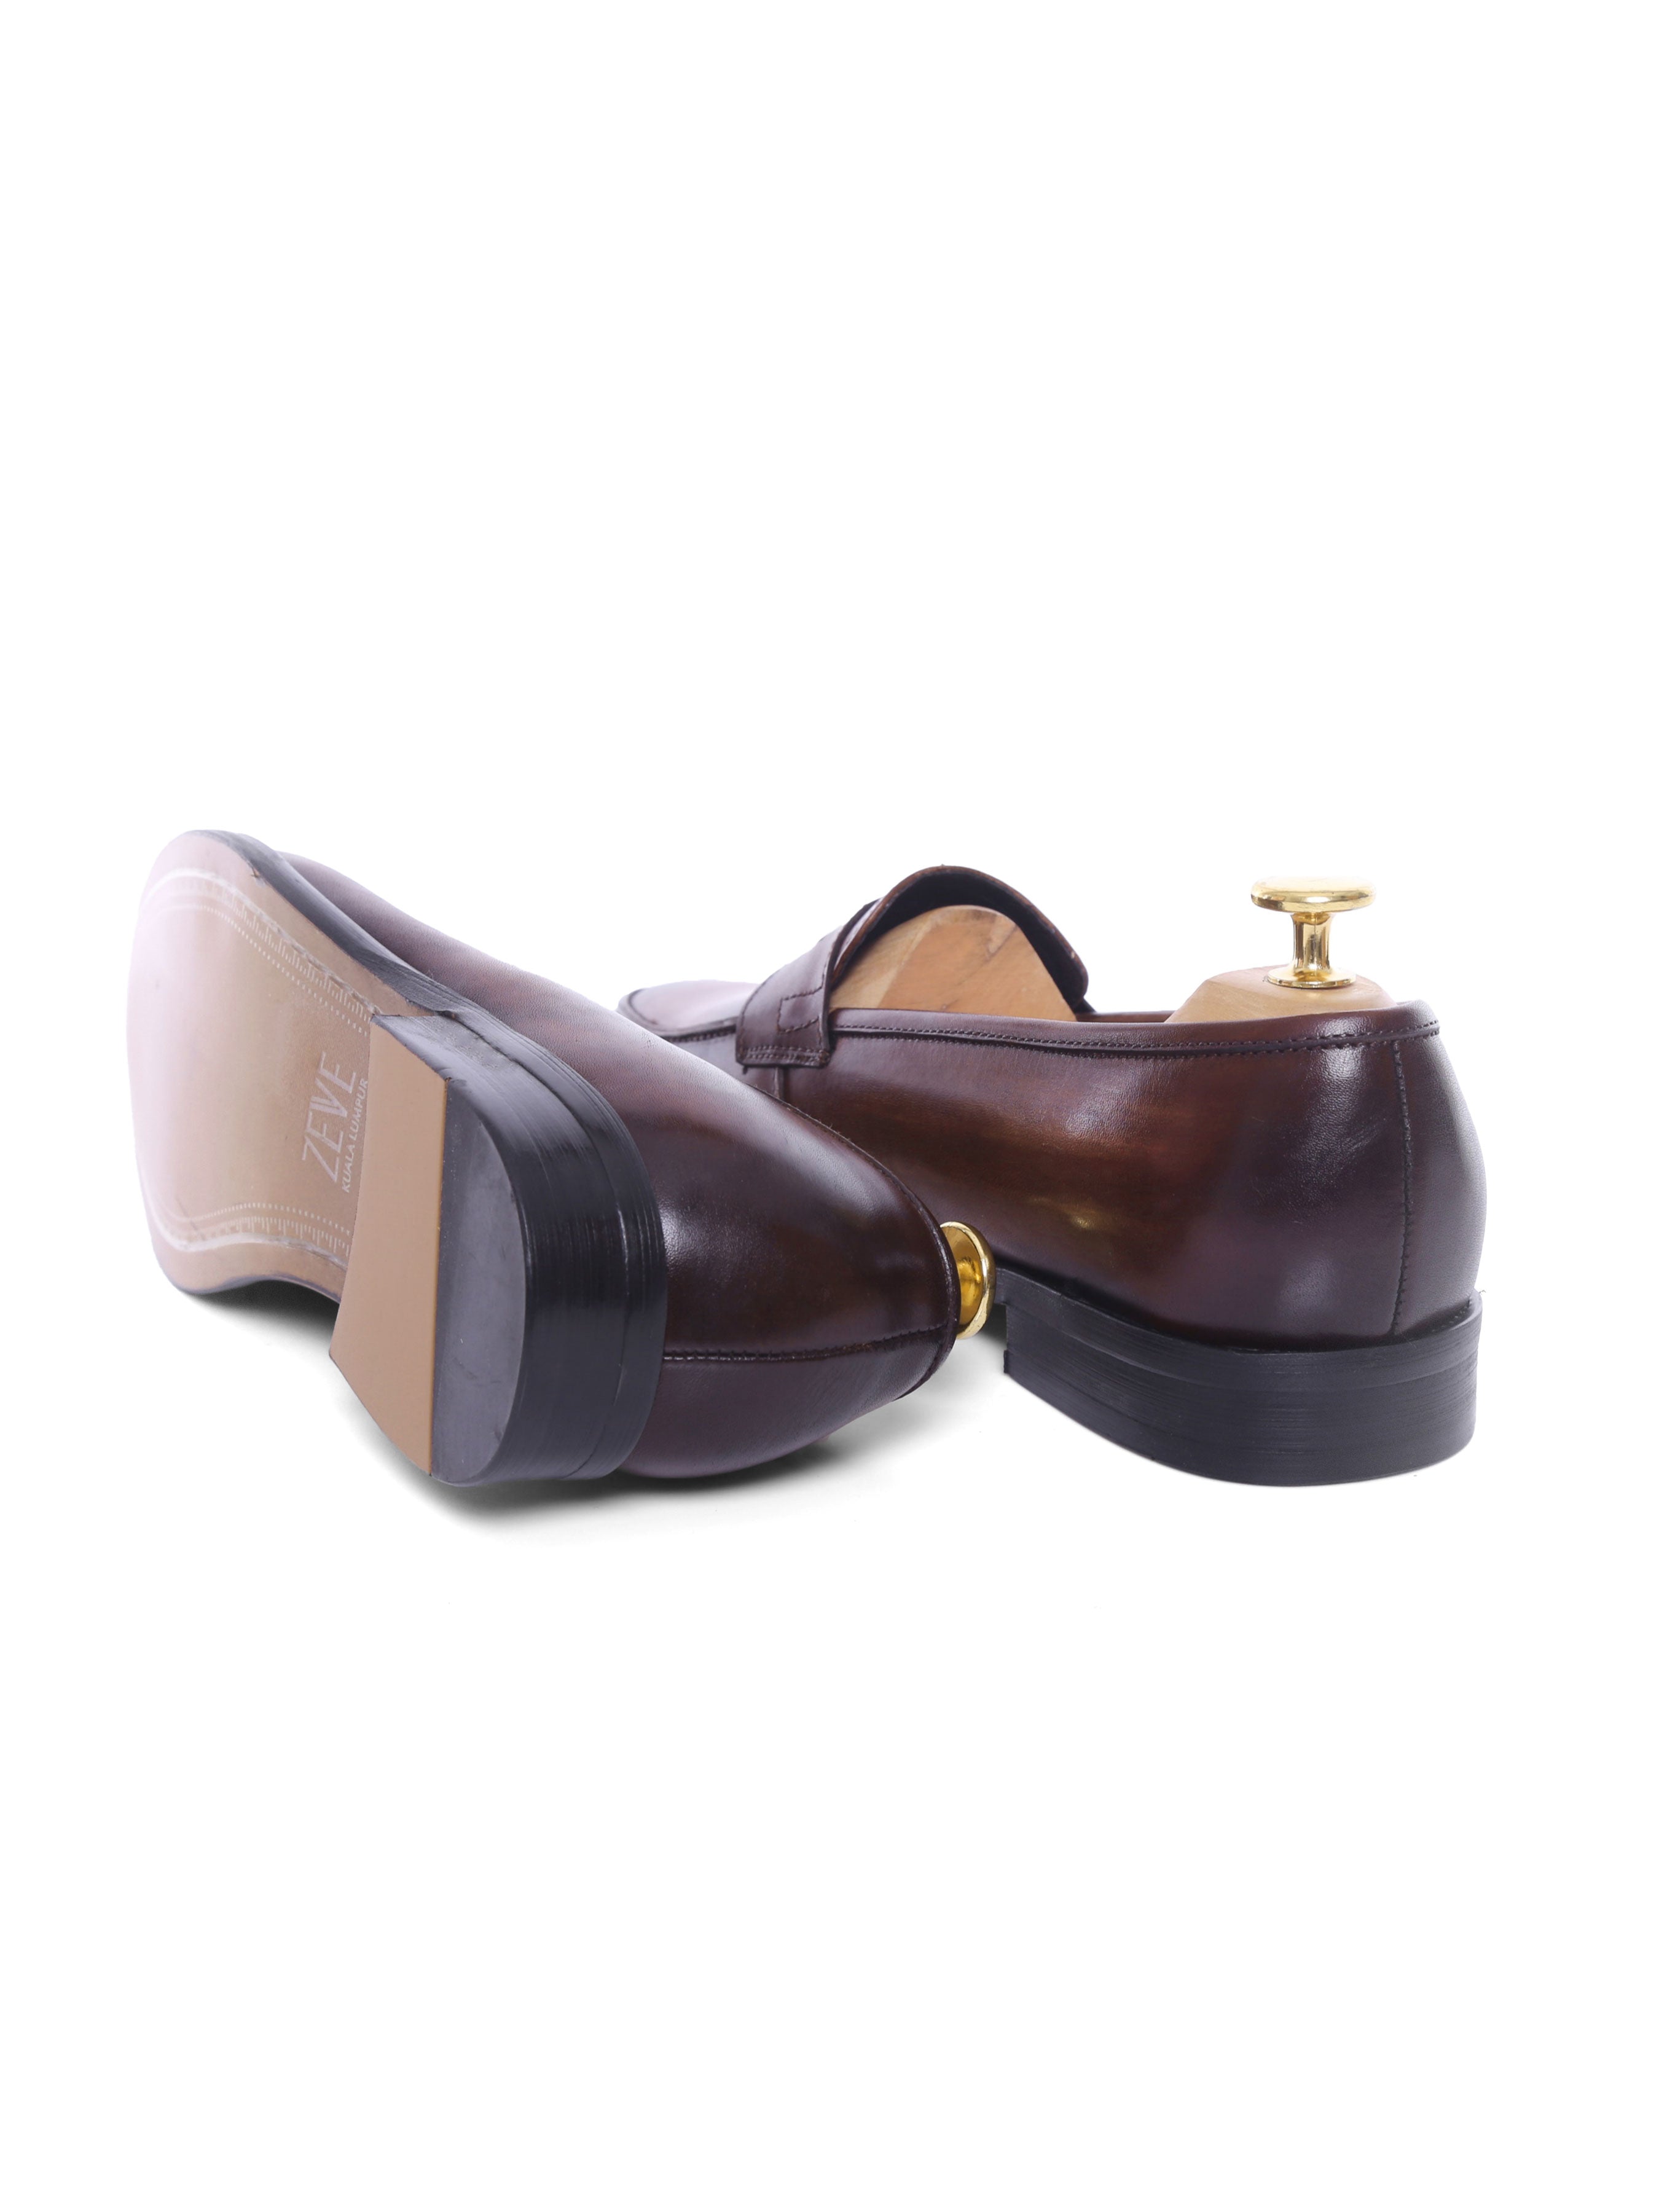 Penny Loafer - Dark Brown (Hand Painted Patina) - Zeve Shoes